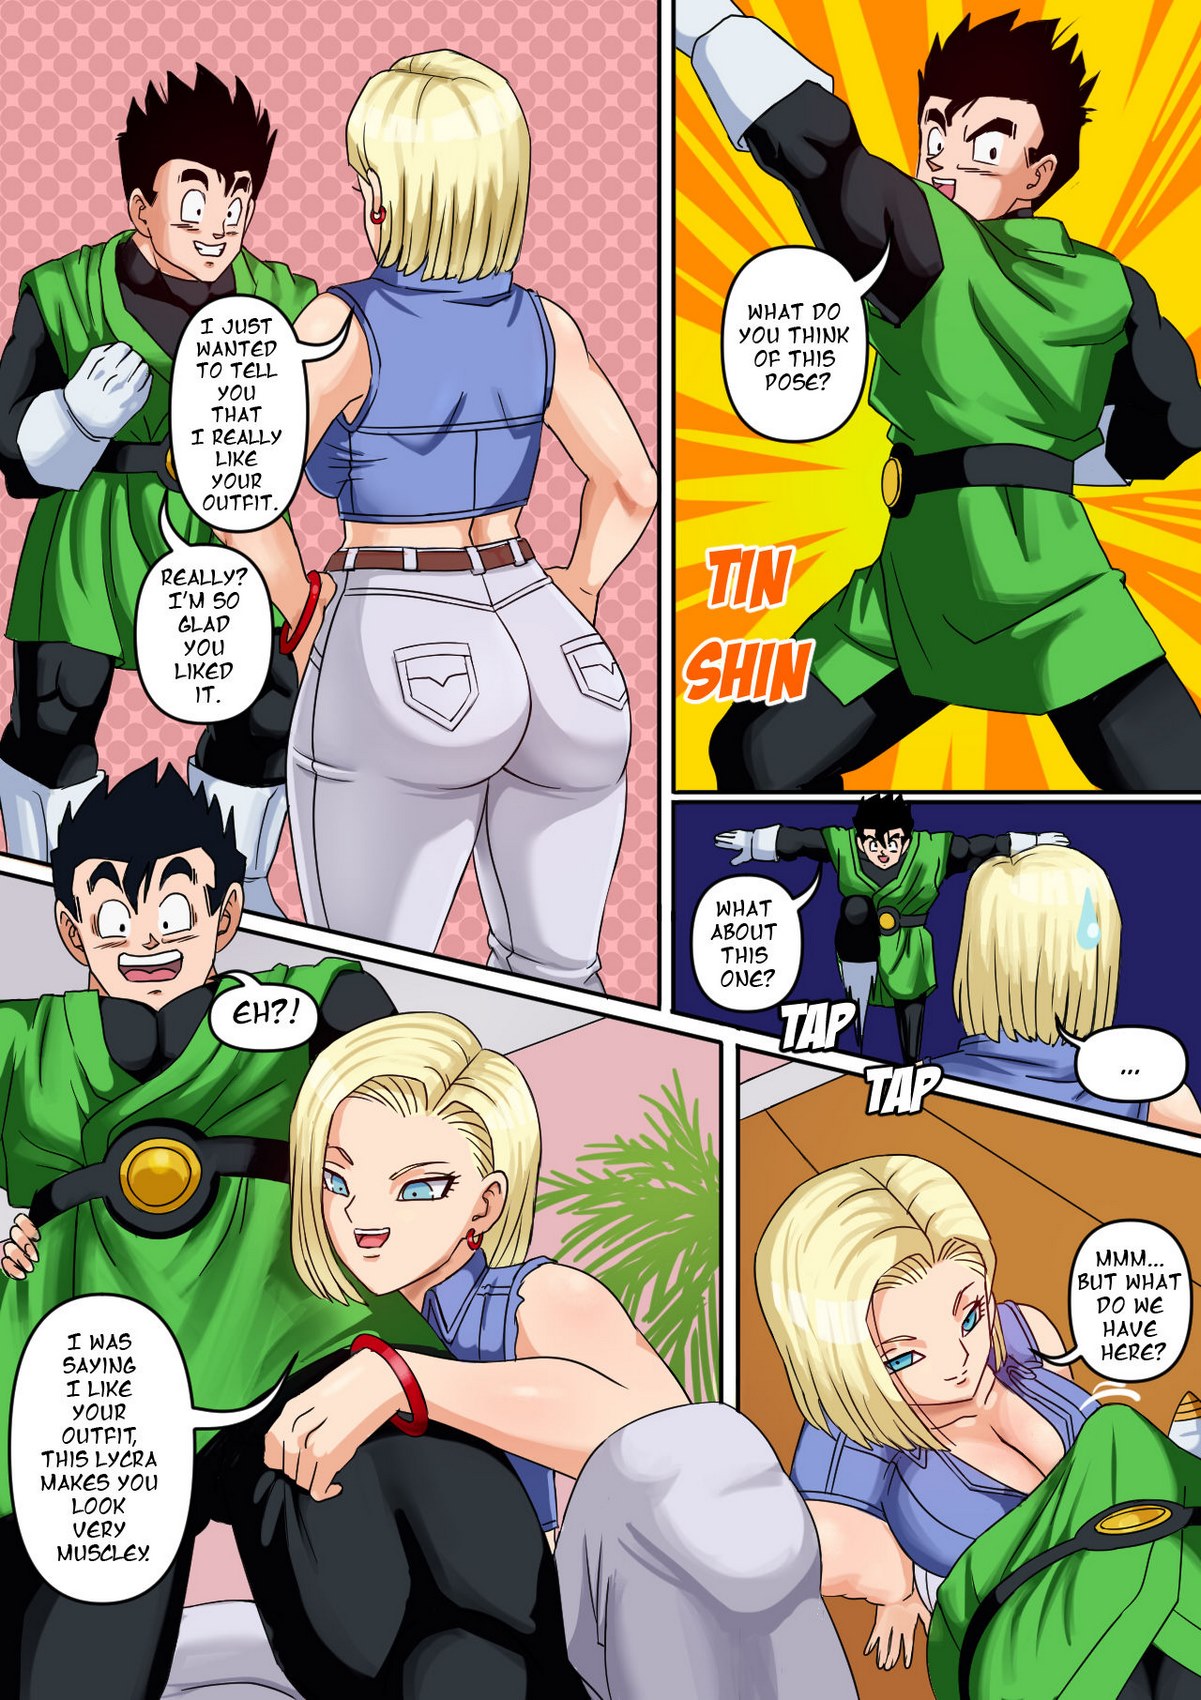 Porn android 18 Android 18